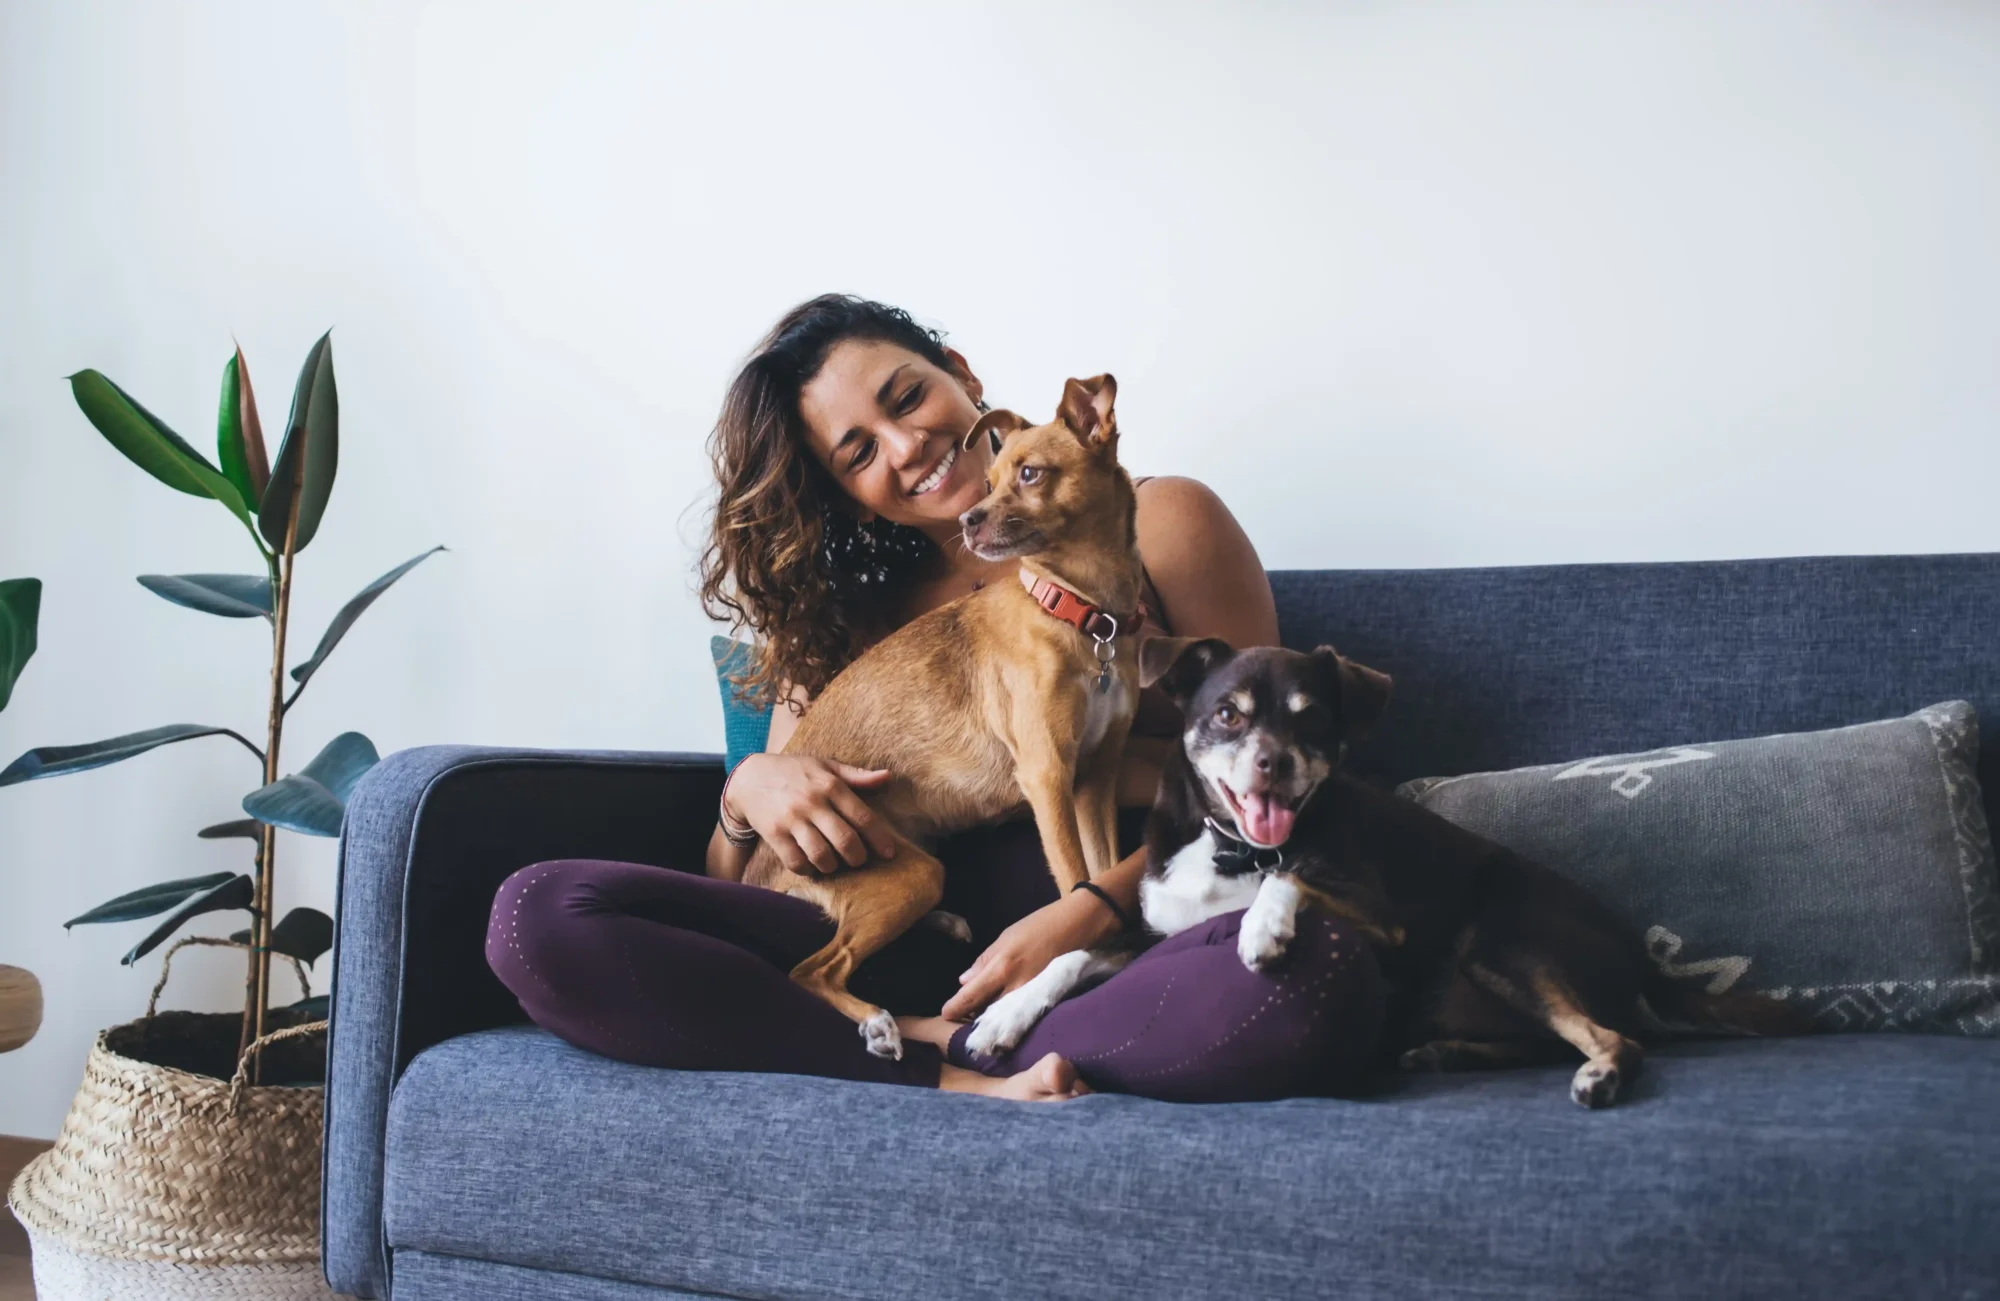 Woman with two dogs on a couch smiling